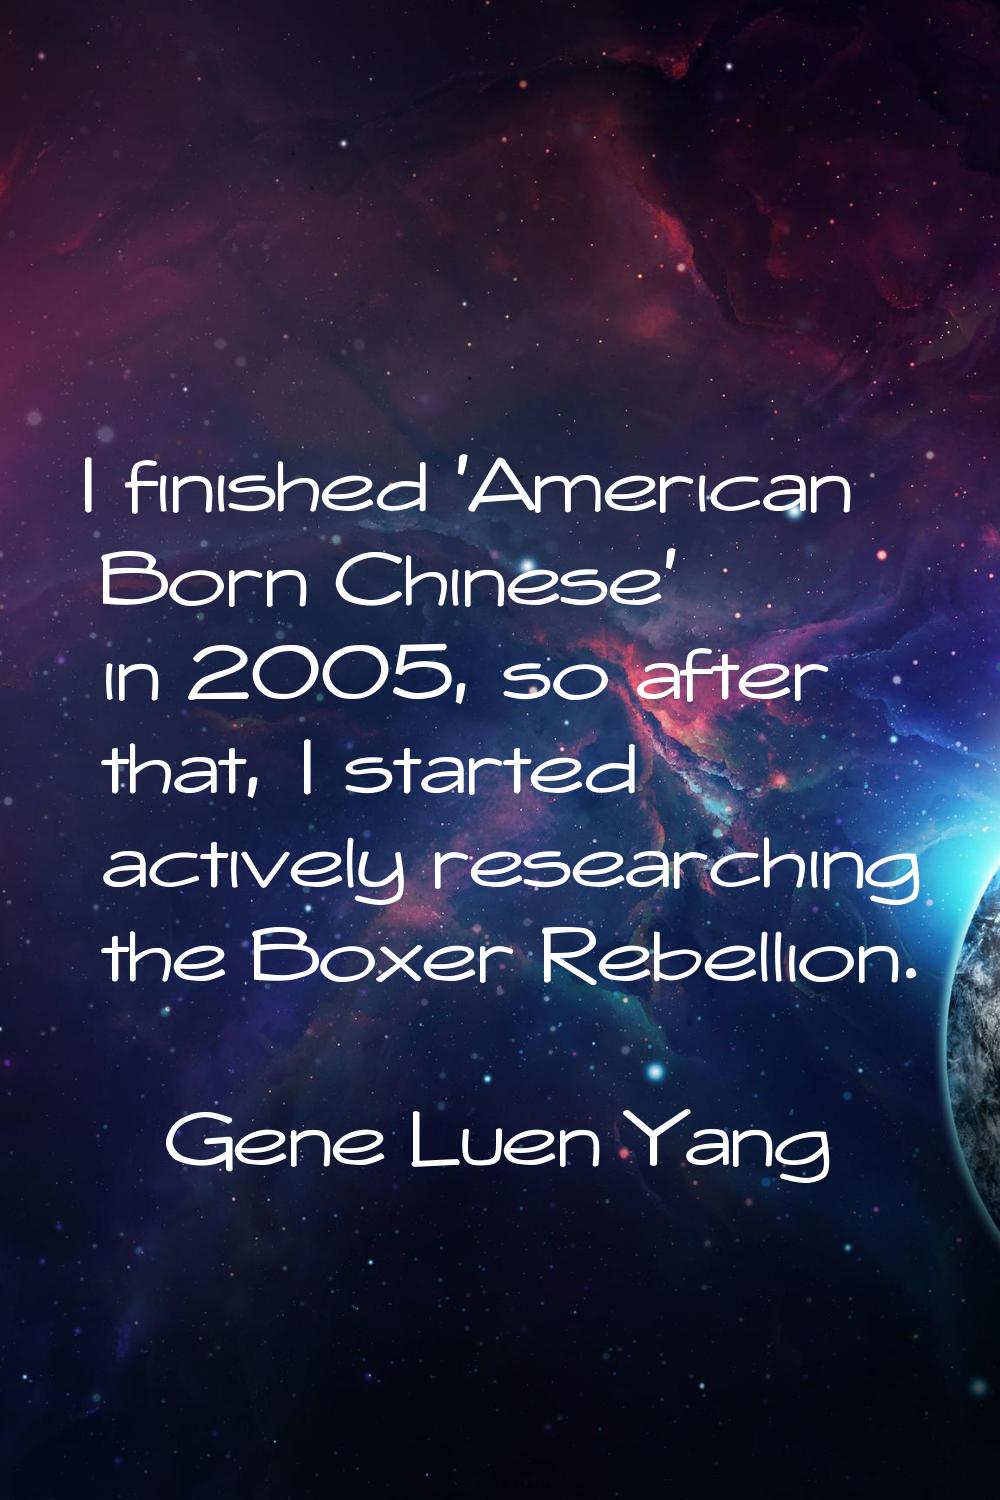 I finished 'American Born Chinese' in 2005, so after that, I started actively researching the Boxer